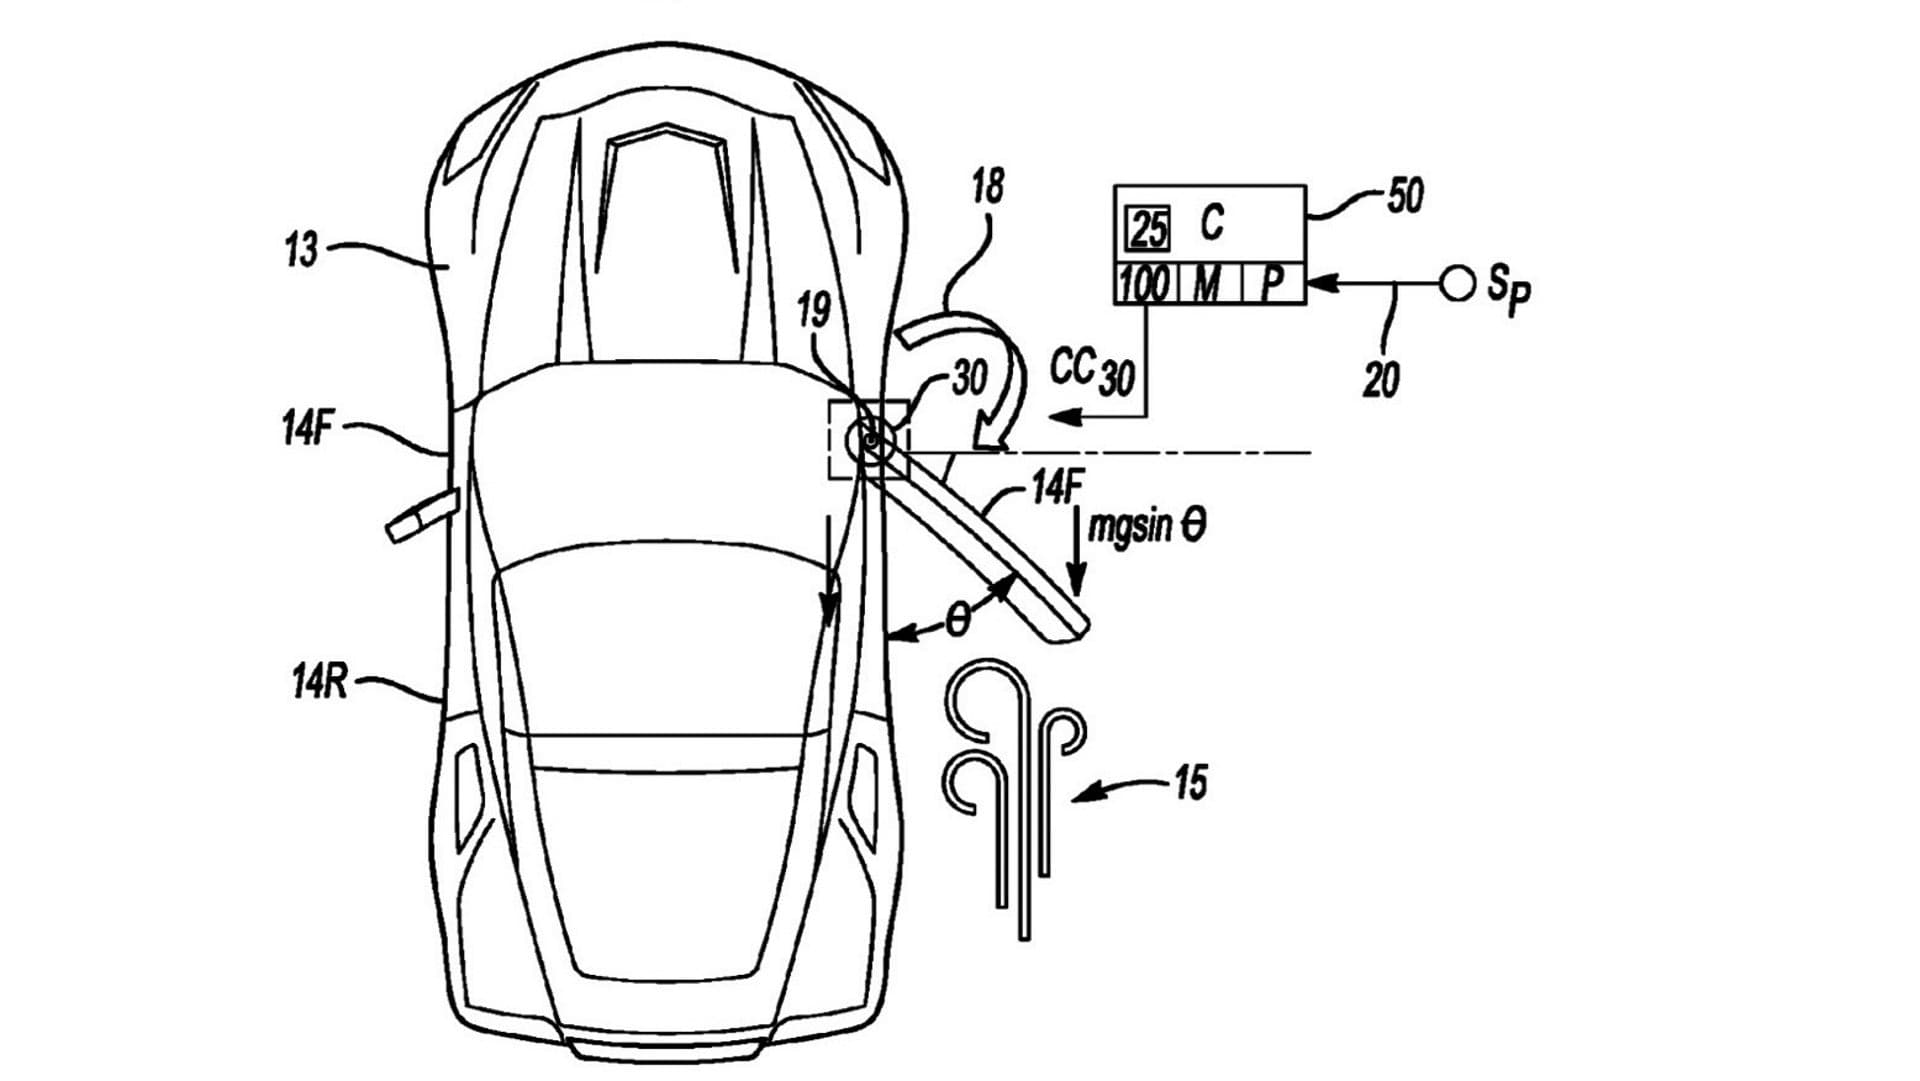 C8 Chevrolet Corvette Might Have Power-Opening Doors, Patent Filing Shows